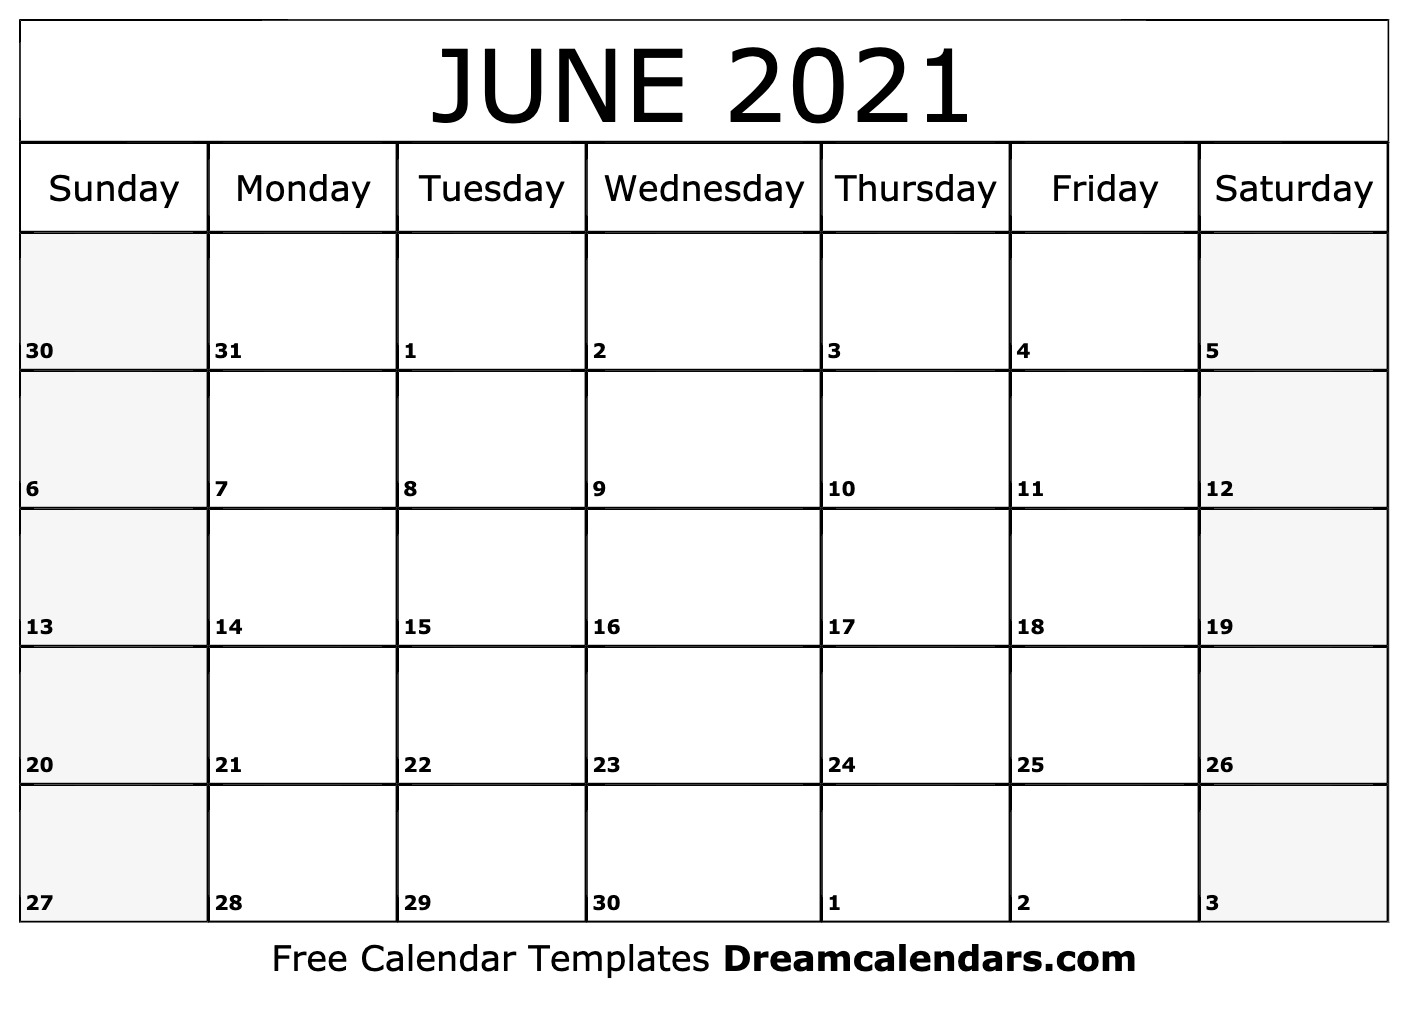 June 2021 Calendar Free Printable with Holidays and Observances